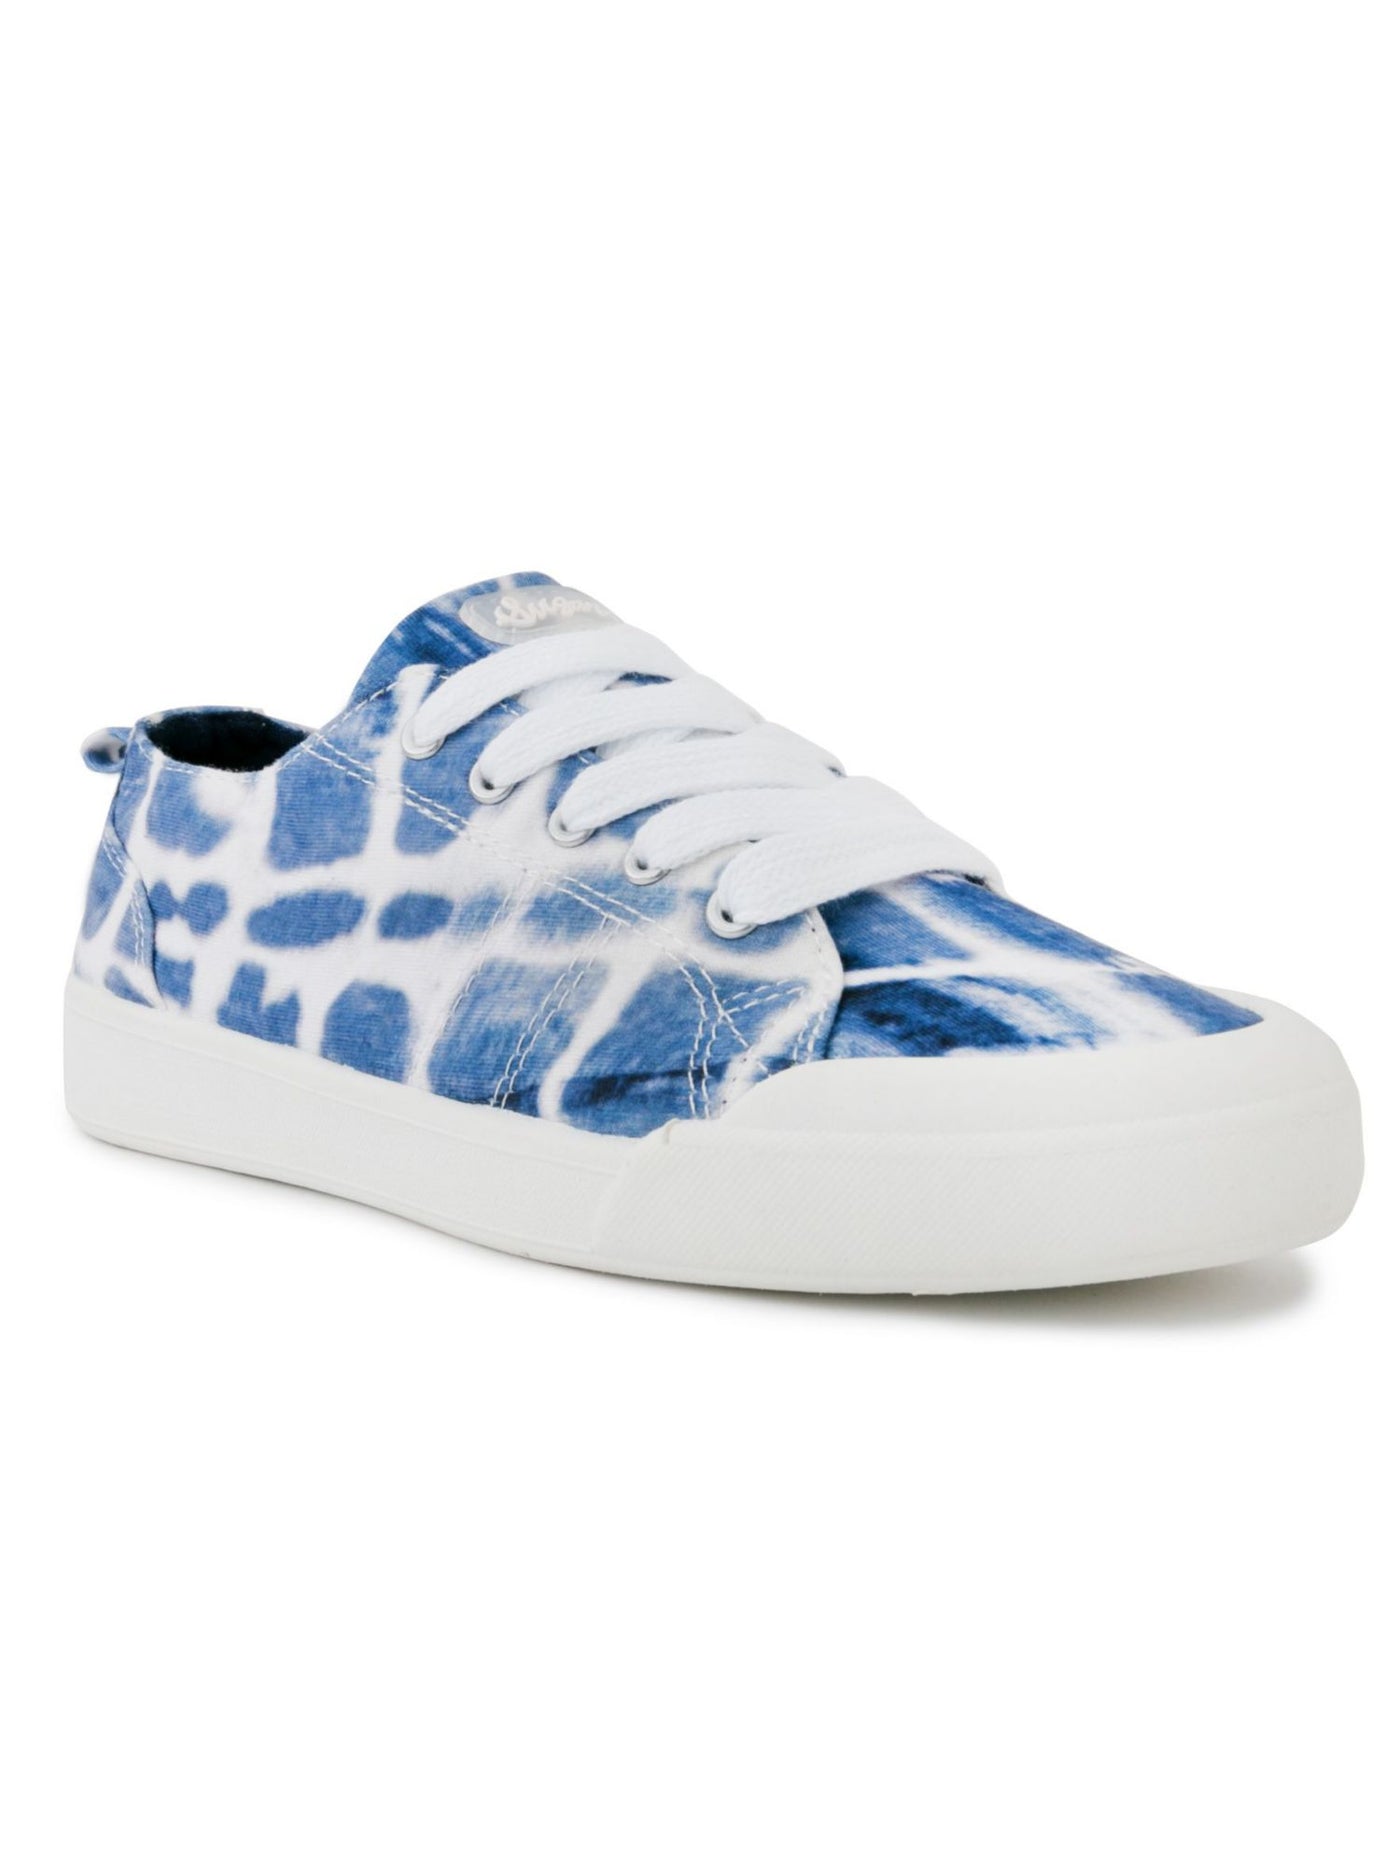 SUGAR Womens Navy Tie Dye Comfort Logo Festival Round Toe Platform Lace-Up Athletic Sneakers 6 M